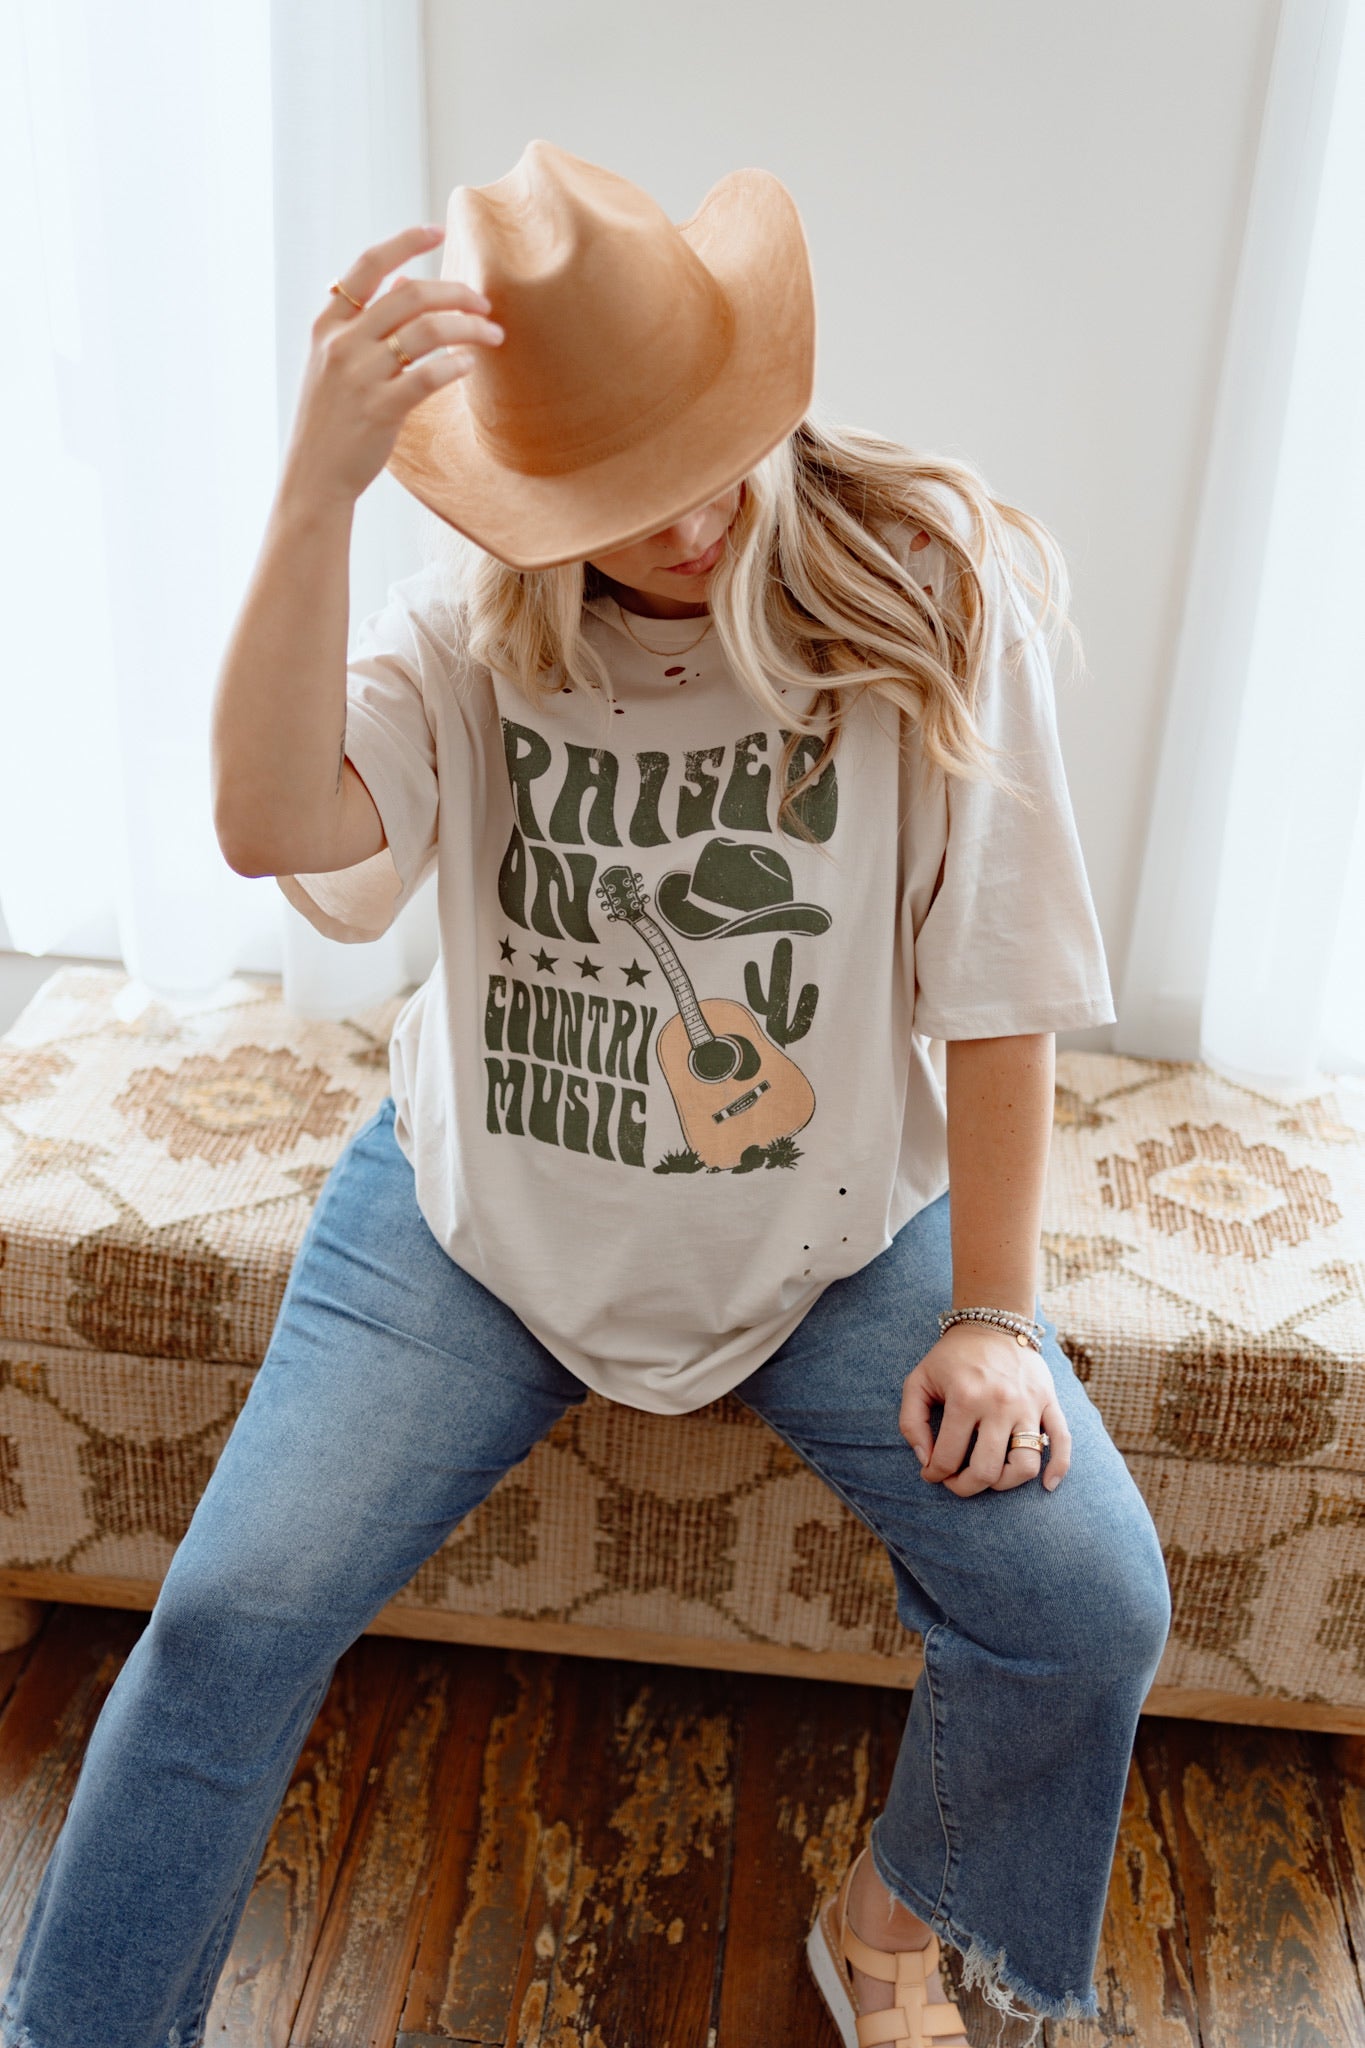 Raised on Country Music Graphic Tee